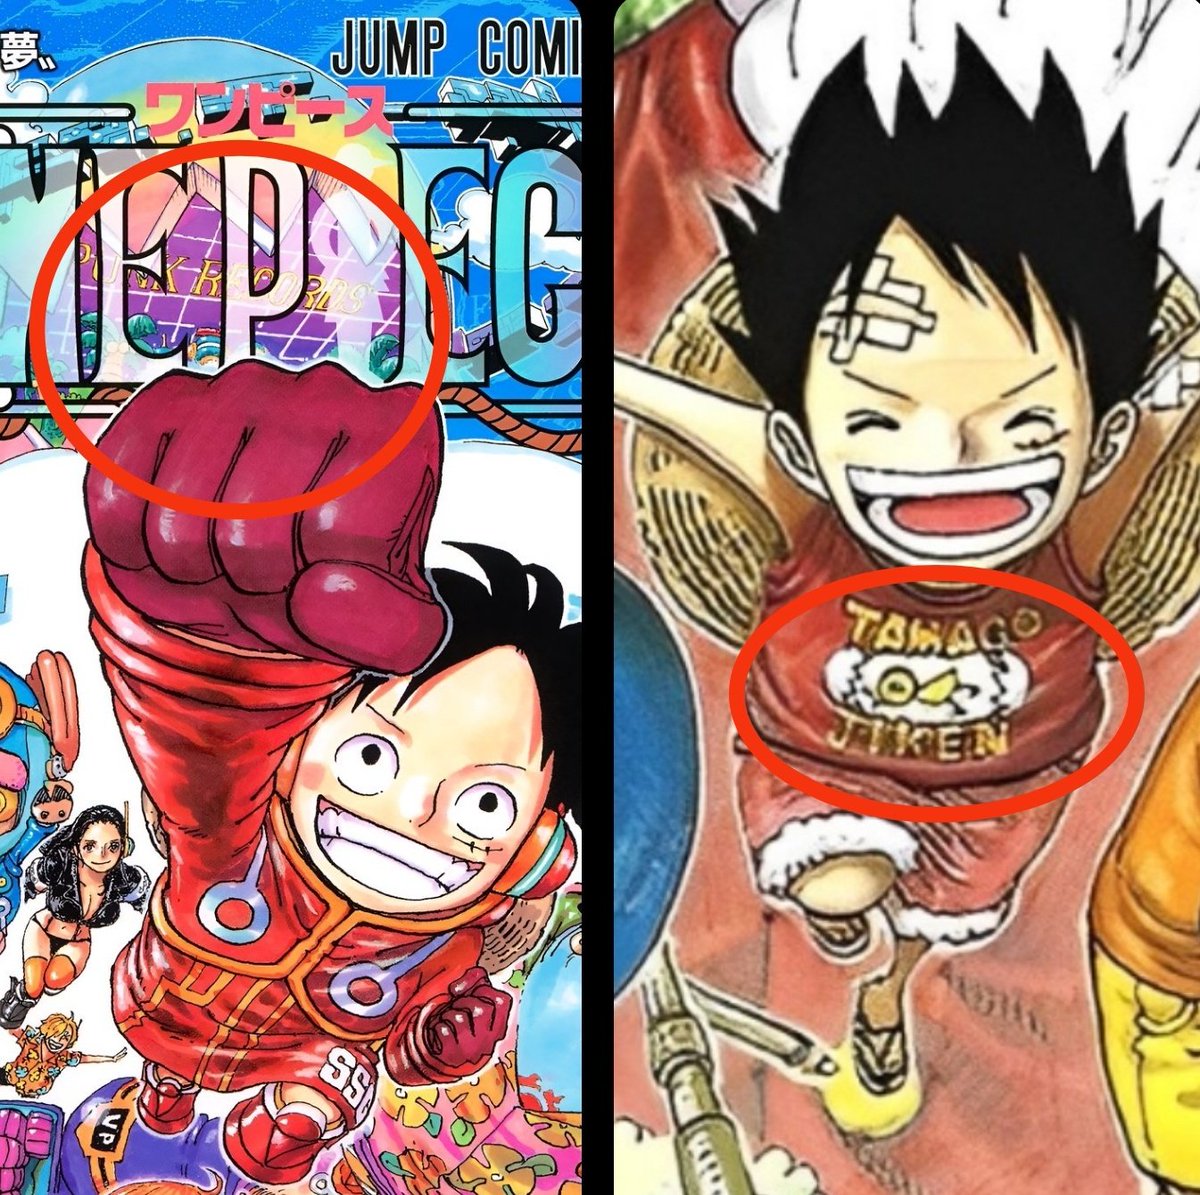 #ONEPIECE

Vol. 106 is titled 'A Genius Dream' and this Cover creates an Image of Luffy breaking an Egg!

Interestingly enough, when Luffy revealed his True Dream in front of Ace&Sabo, his T-Shirt displayed a Design of a broken Egg with the Writing 'Tamago Jiken' [Egg Incident]!!